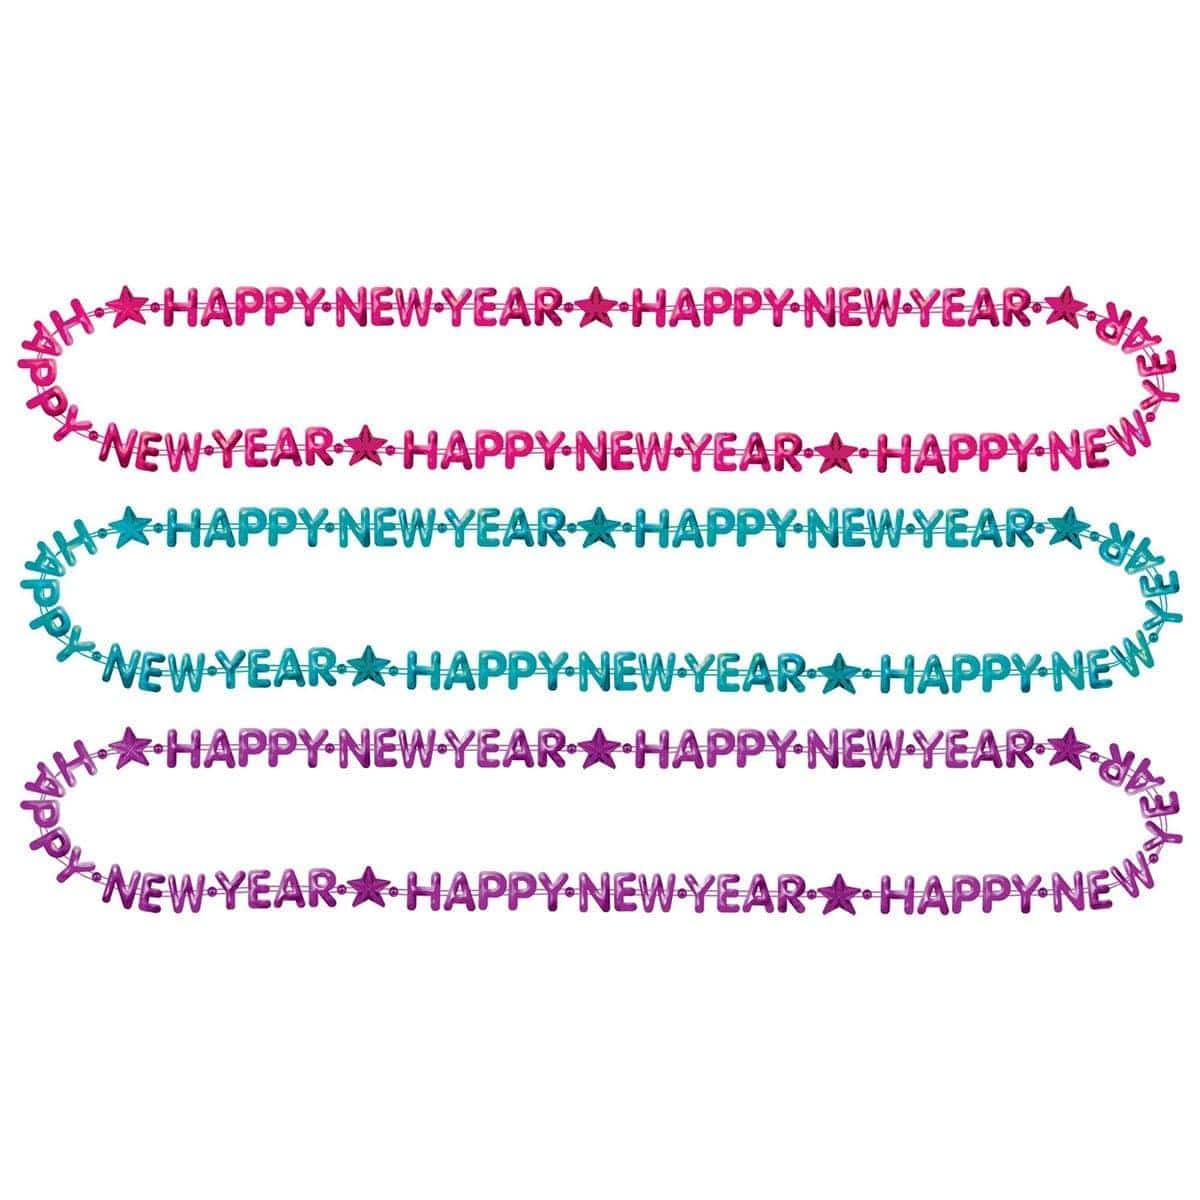 Buy New Year Happy New Year plastic necklace sold at Party Expert